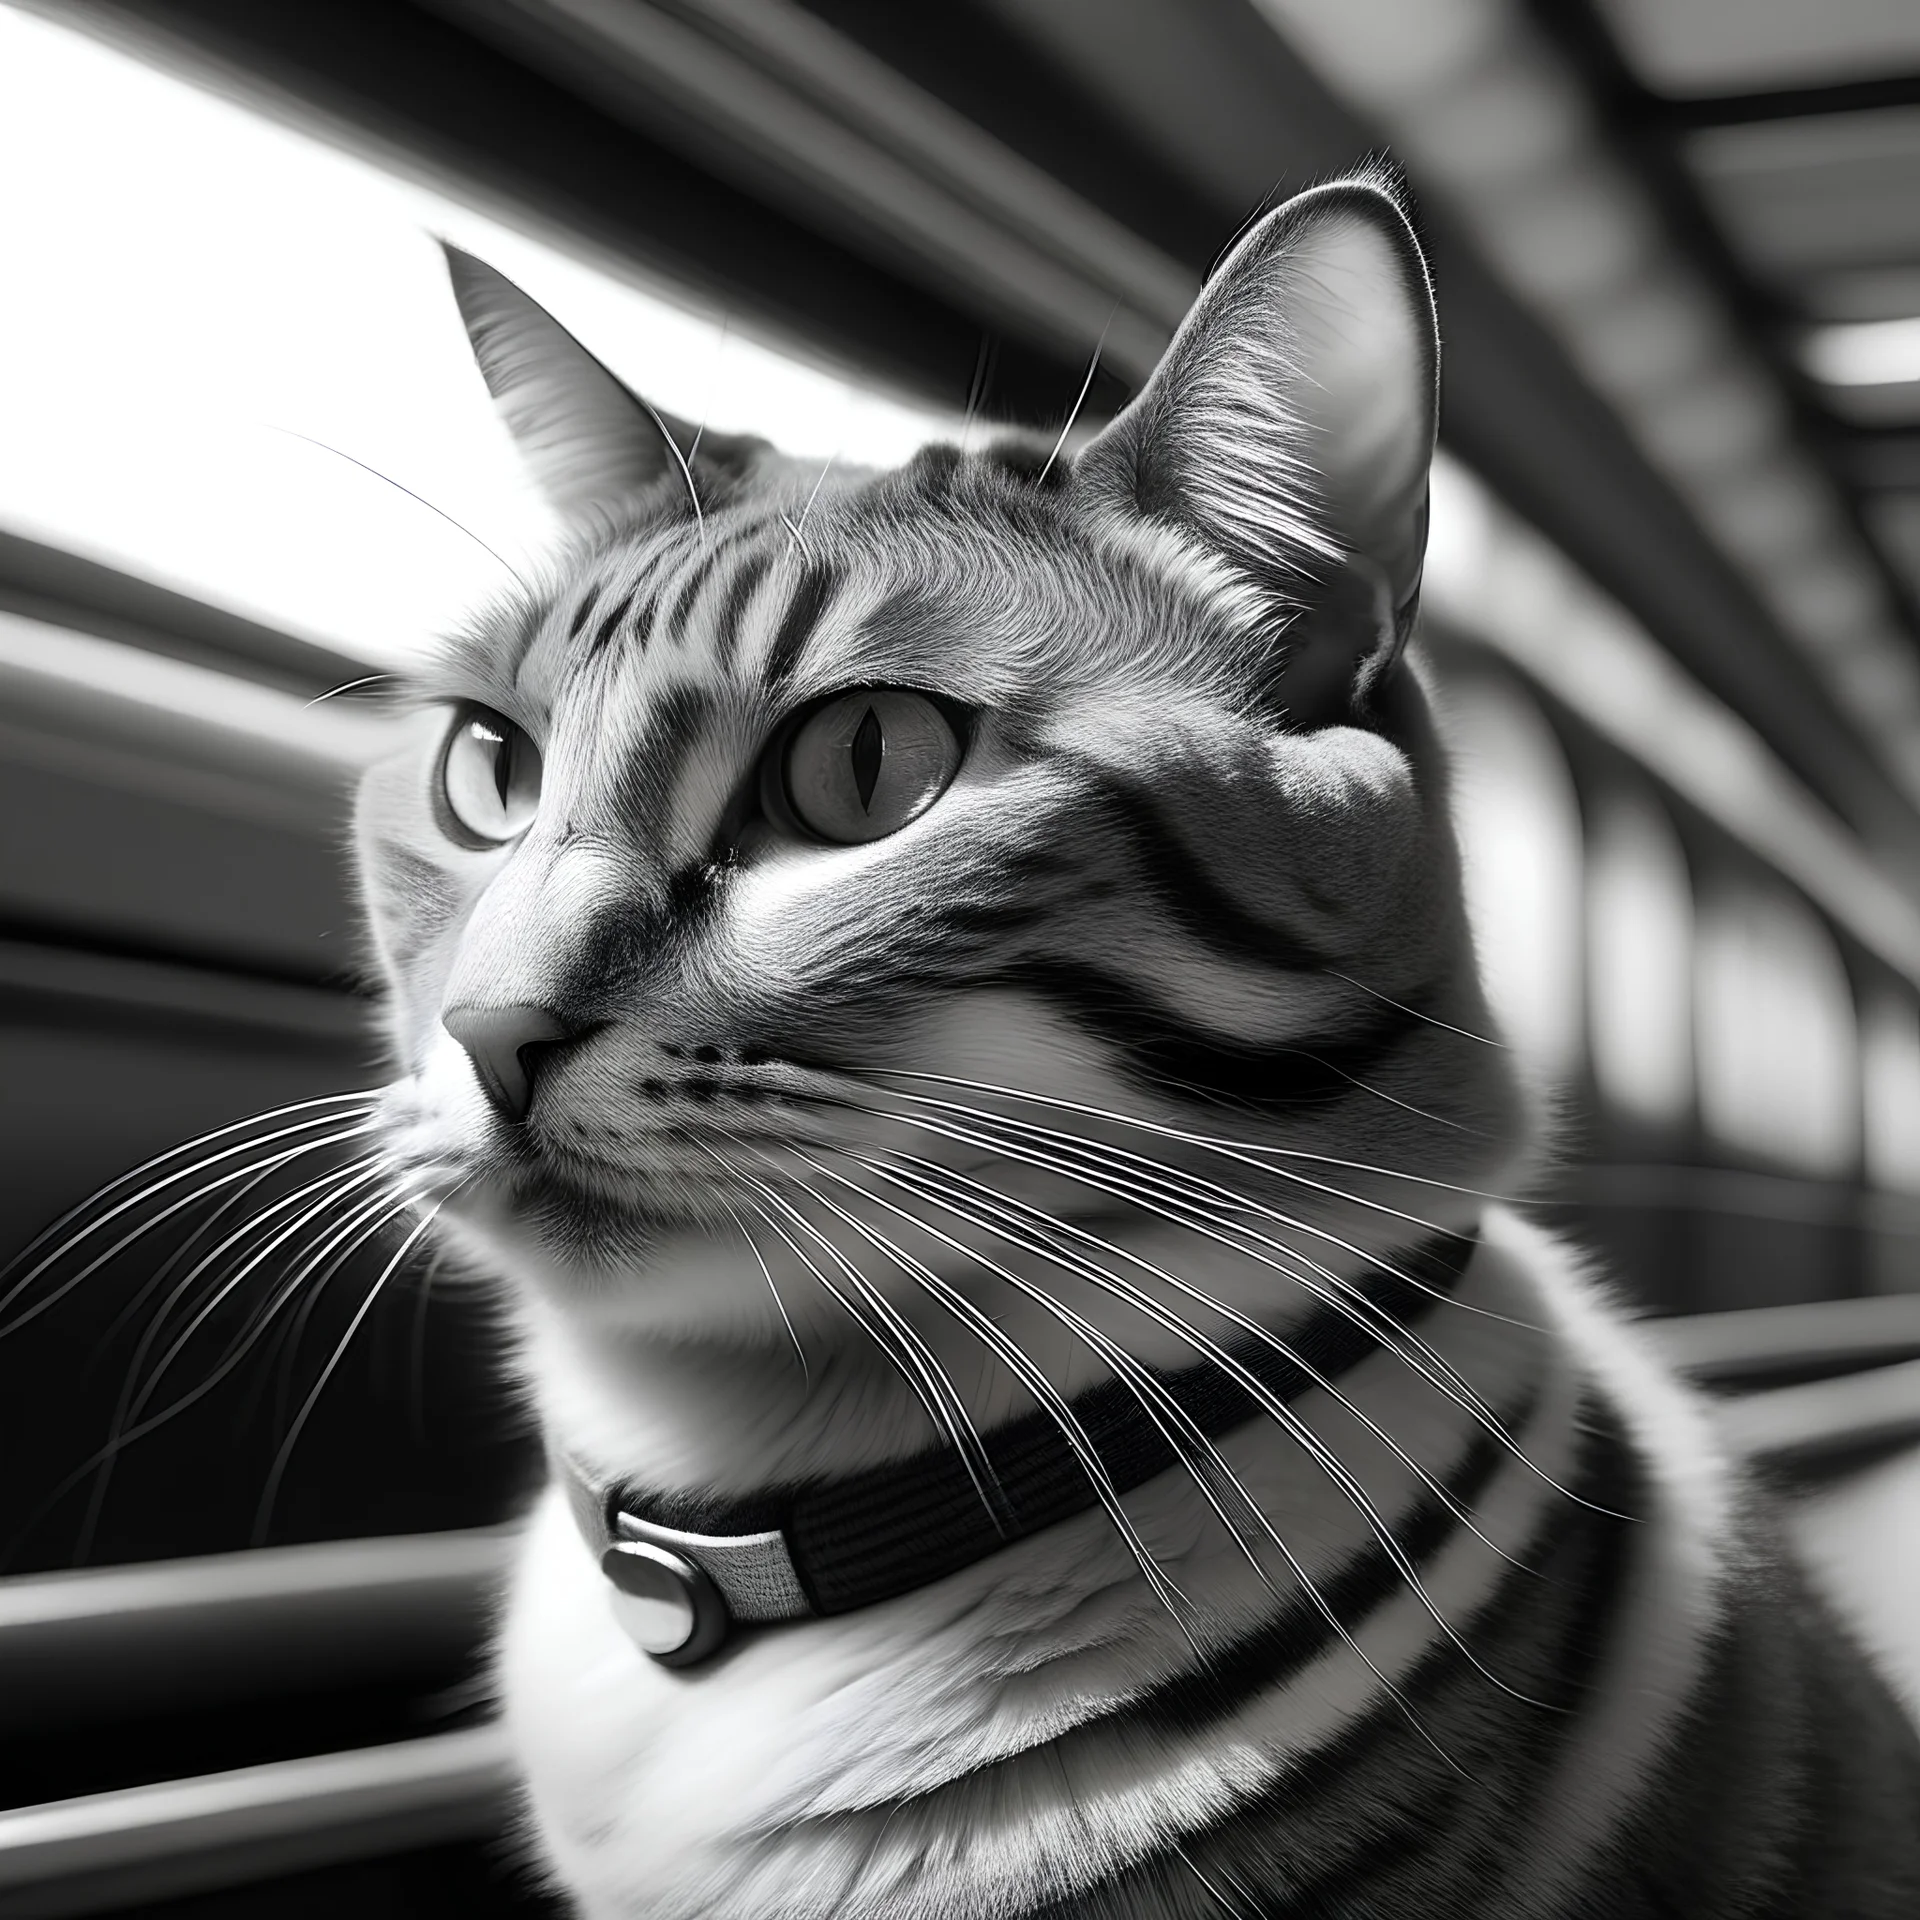 monorail cat with monocle in monochrome